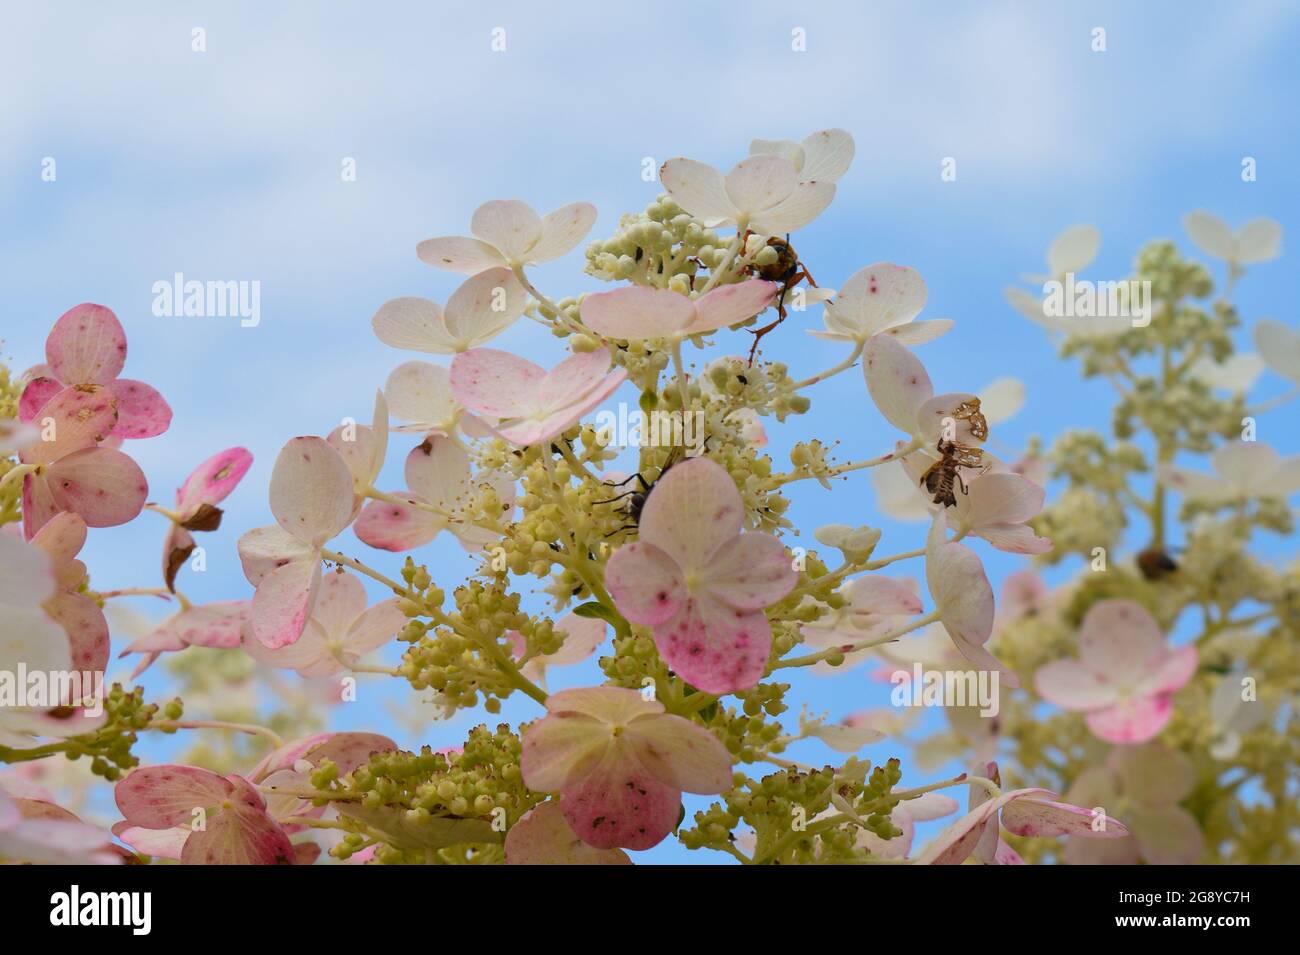 flowering shrub blooms with insects Stock Photo